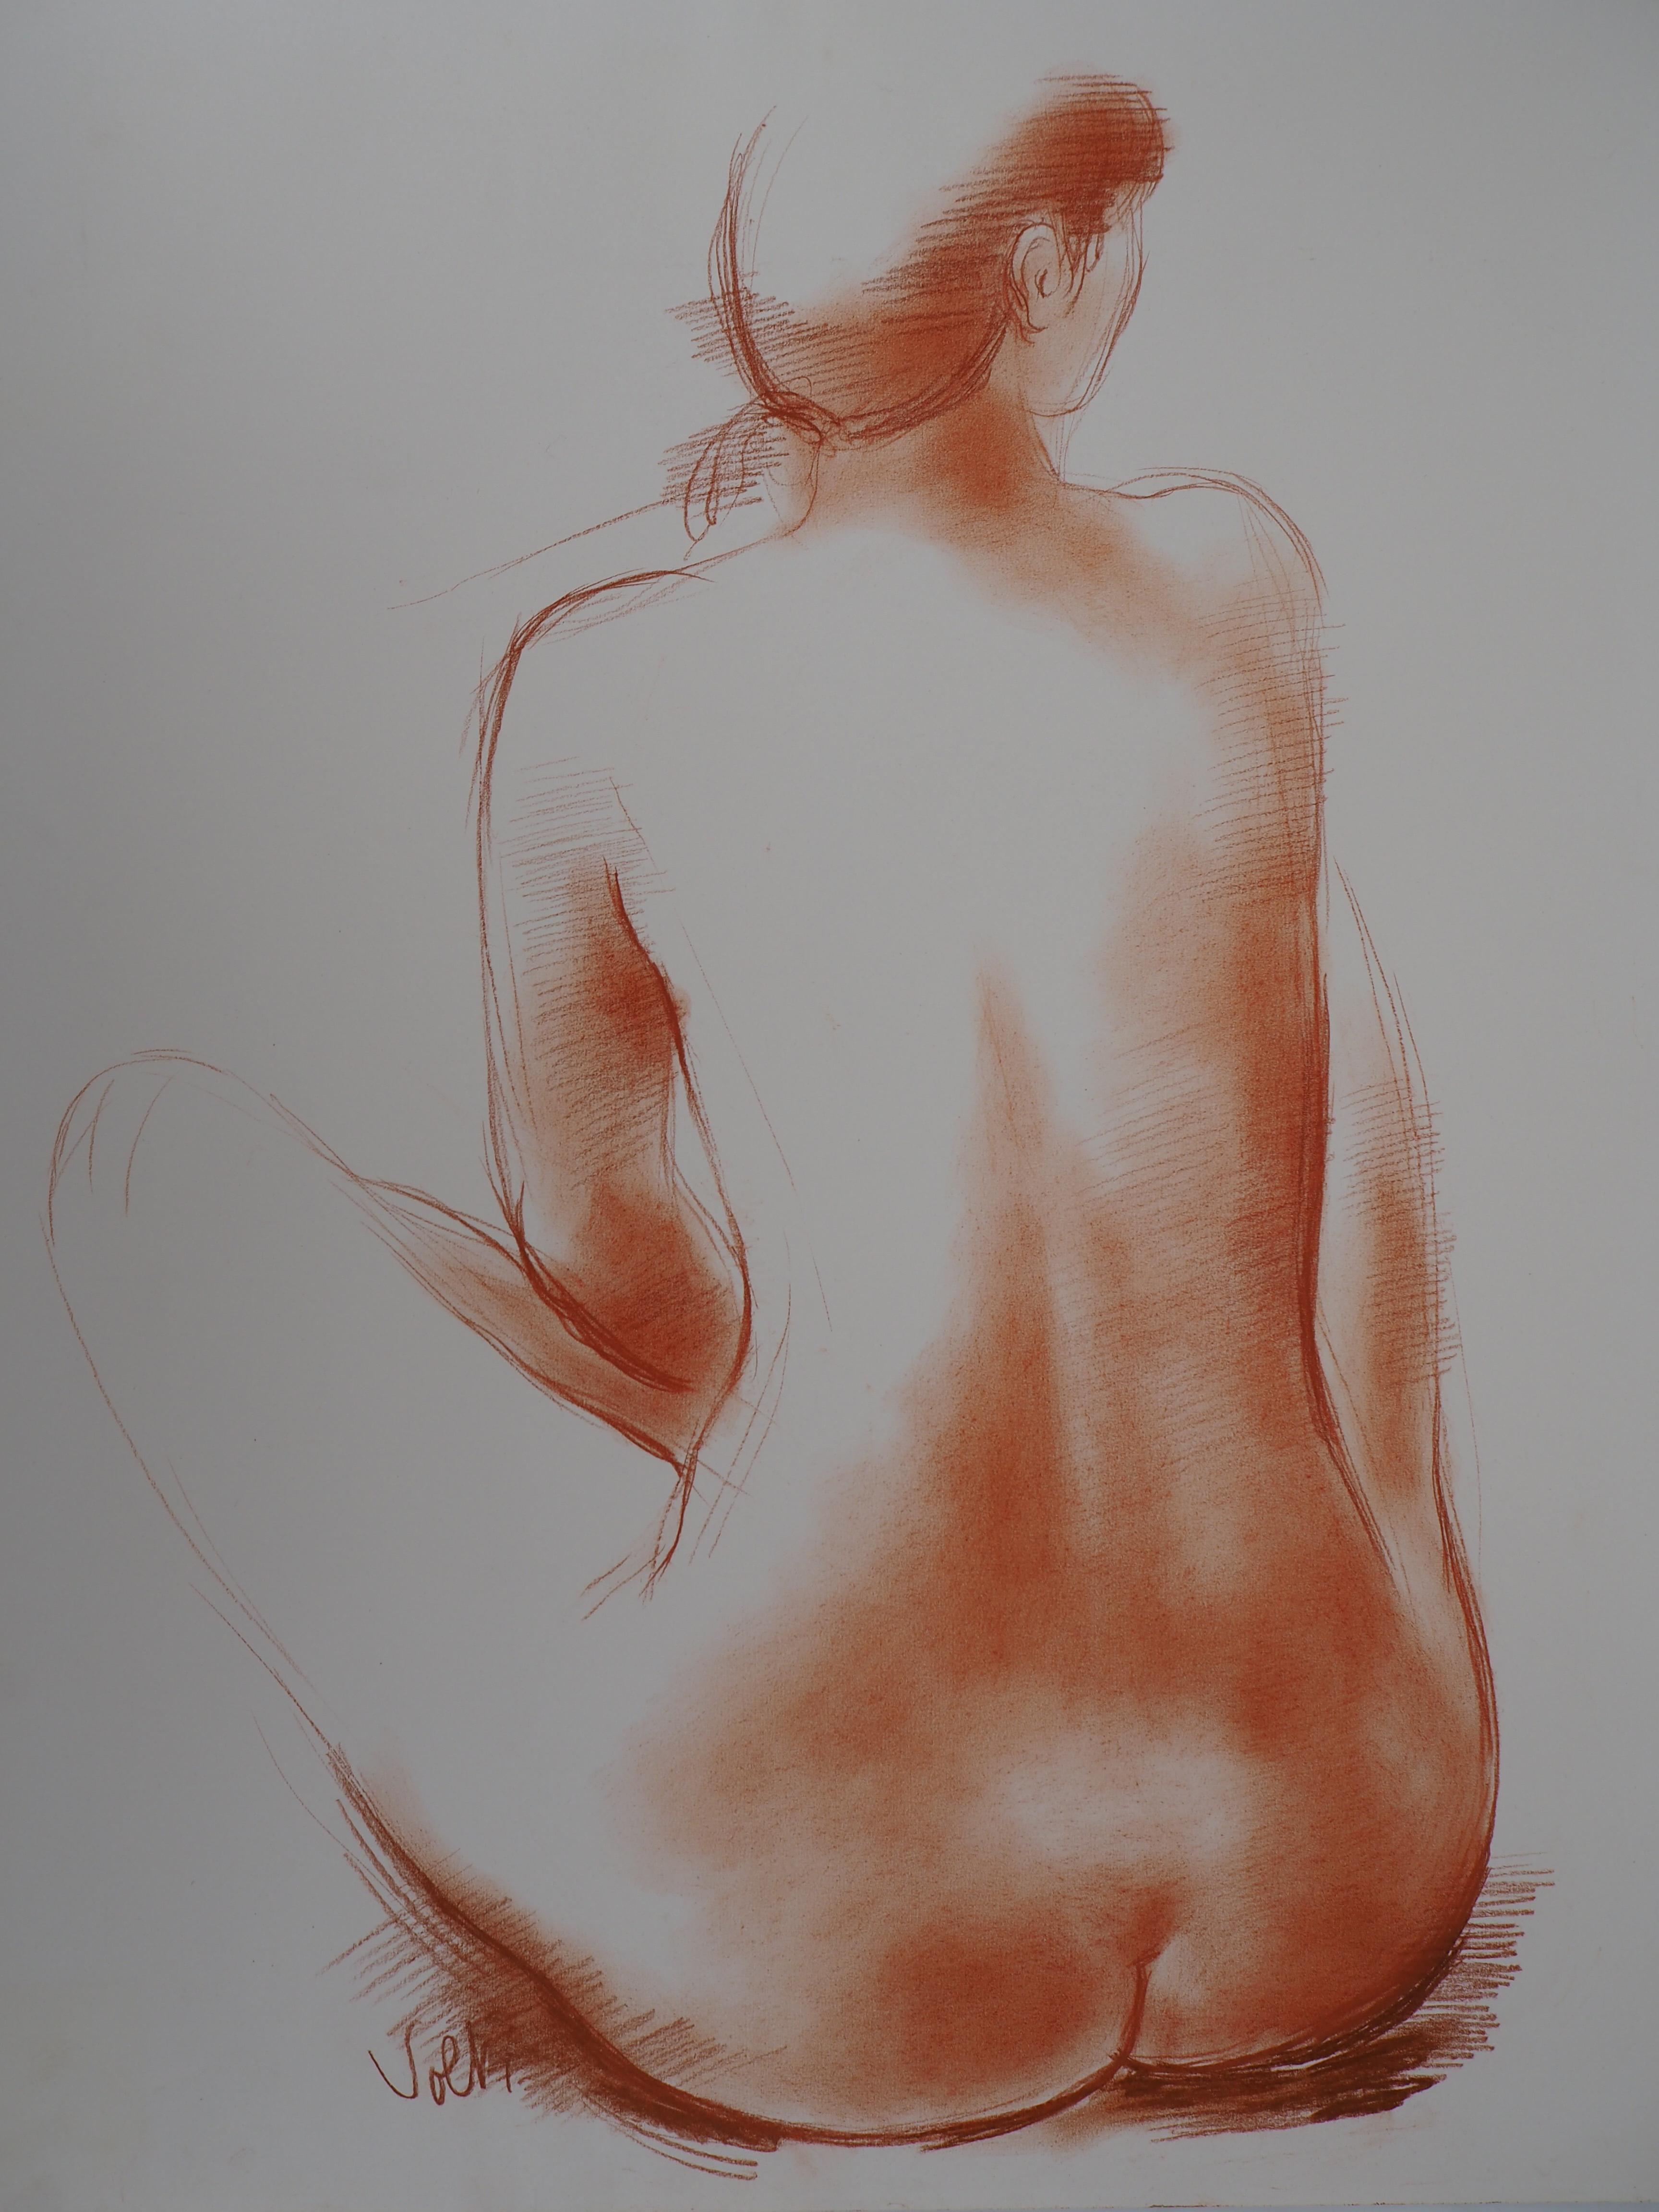 Antoniucci VOLTI
Sitted nude

Original drawing in sanguine (charcoal)
Signed bottom left
On heavy paper 65 x 50 cm (26 x 20 inch)

Excellent condition